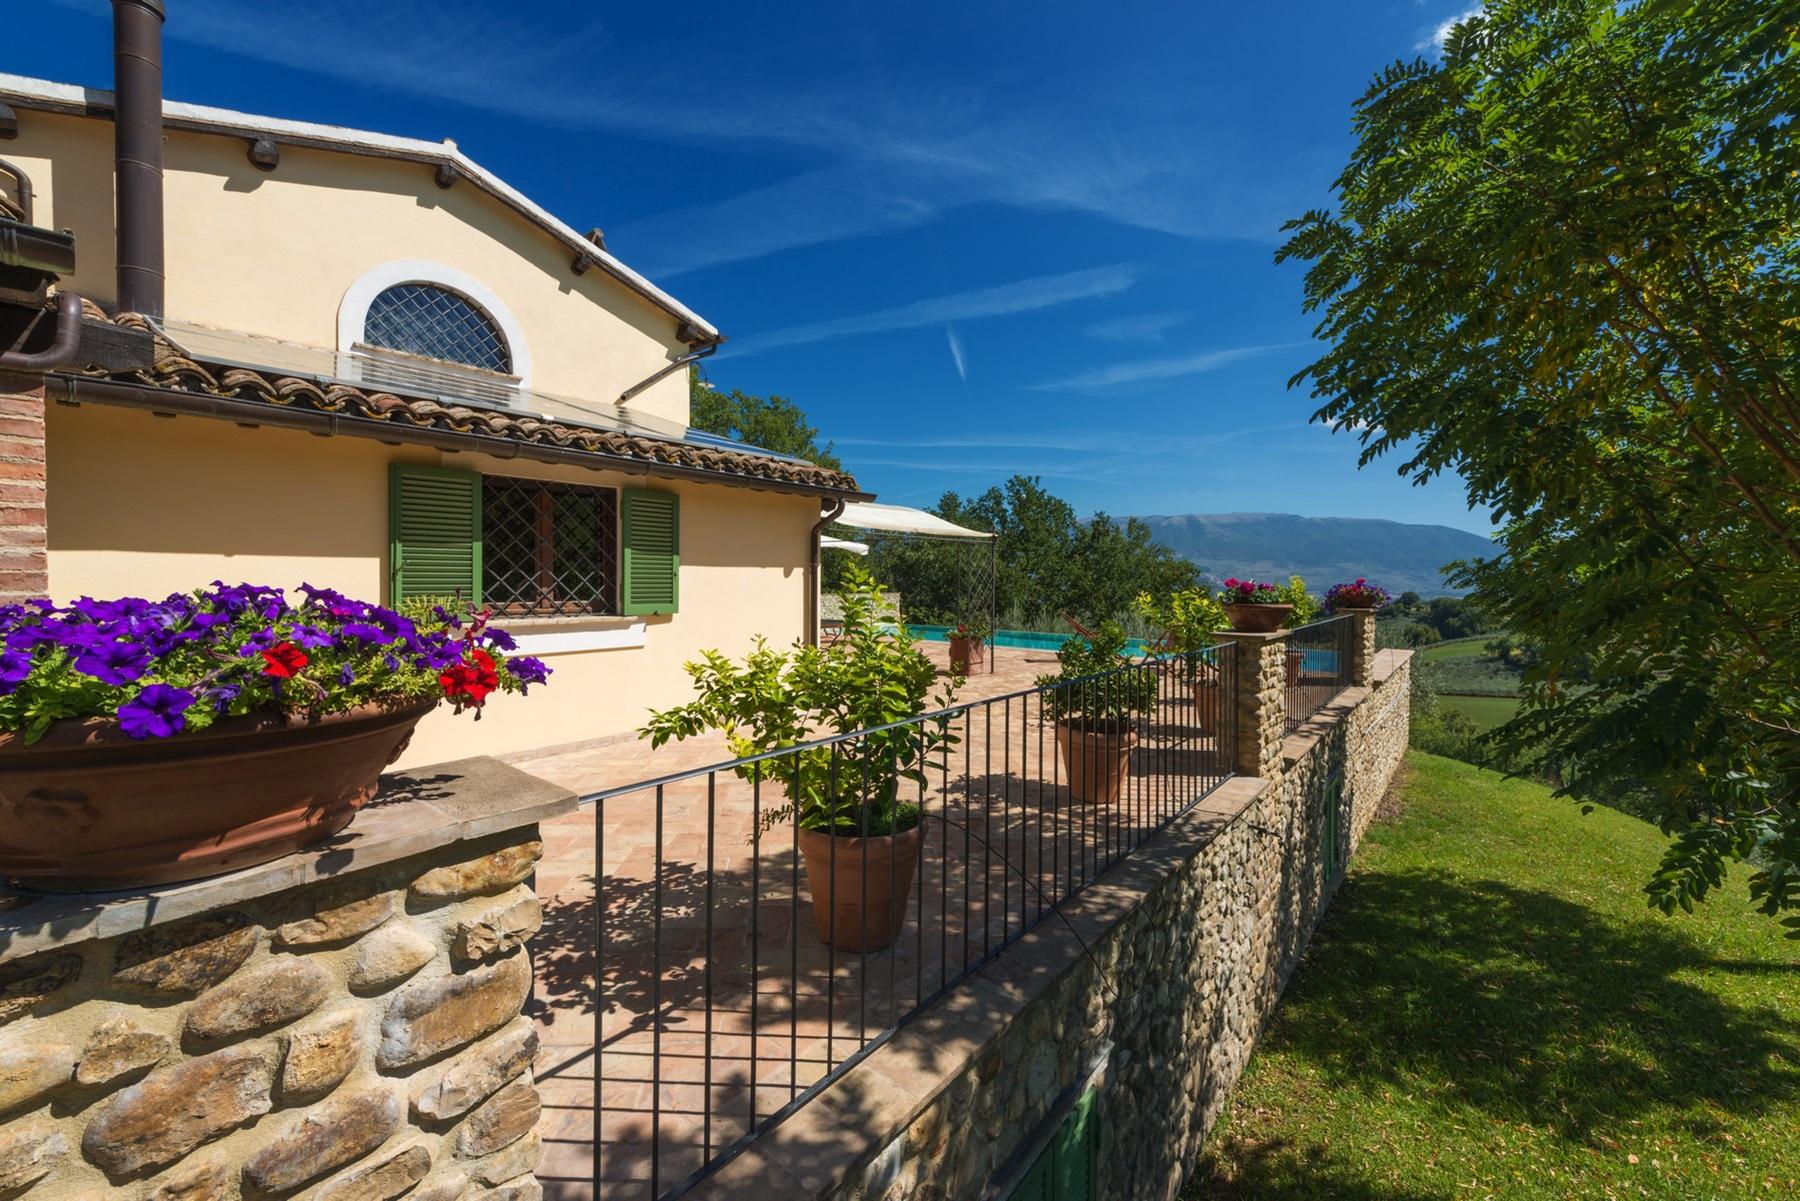 Enchanting property in the Umbrian hills - 6